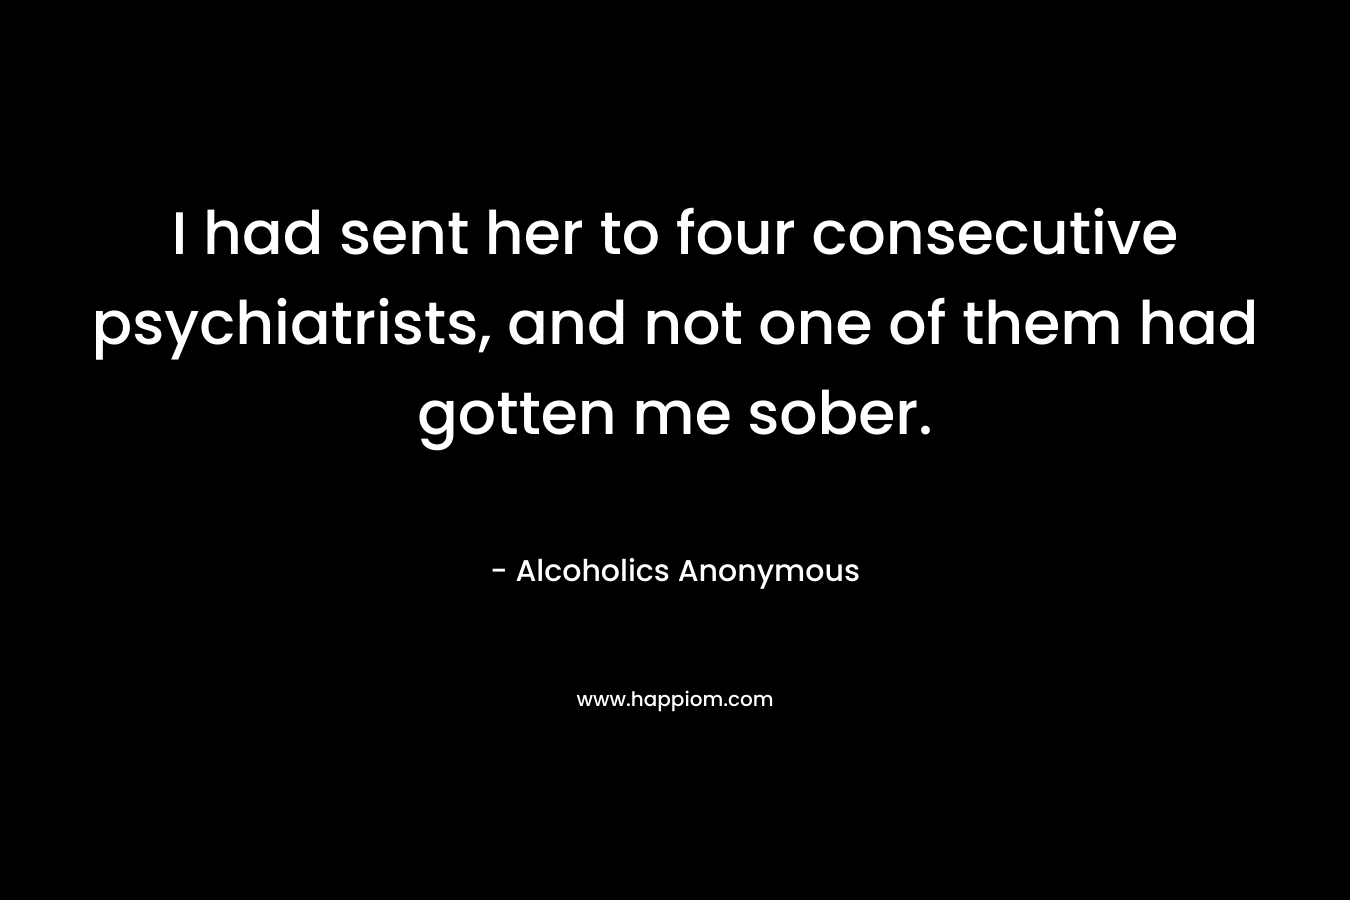 I had sent her to four consecutive psychiatrists, and not one of them had gotten me sober. – Alcoholics Anonymous